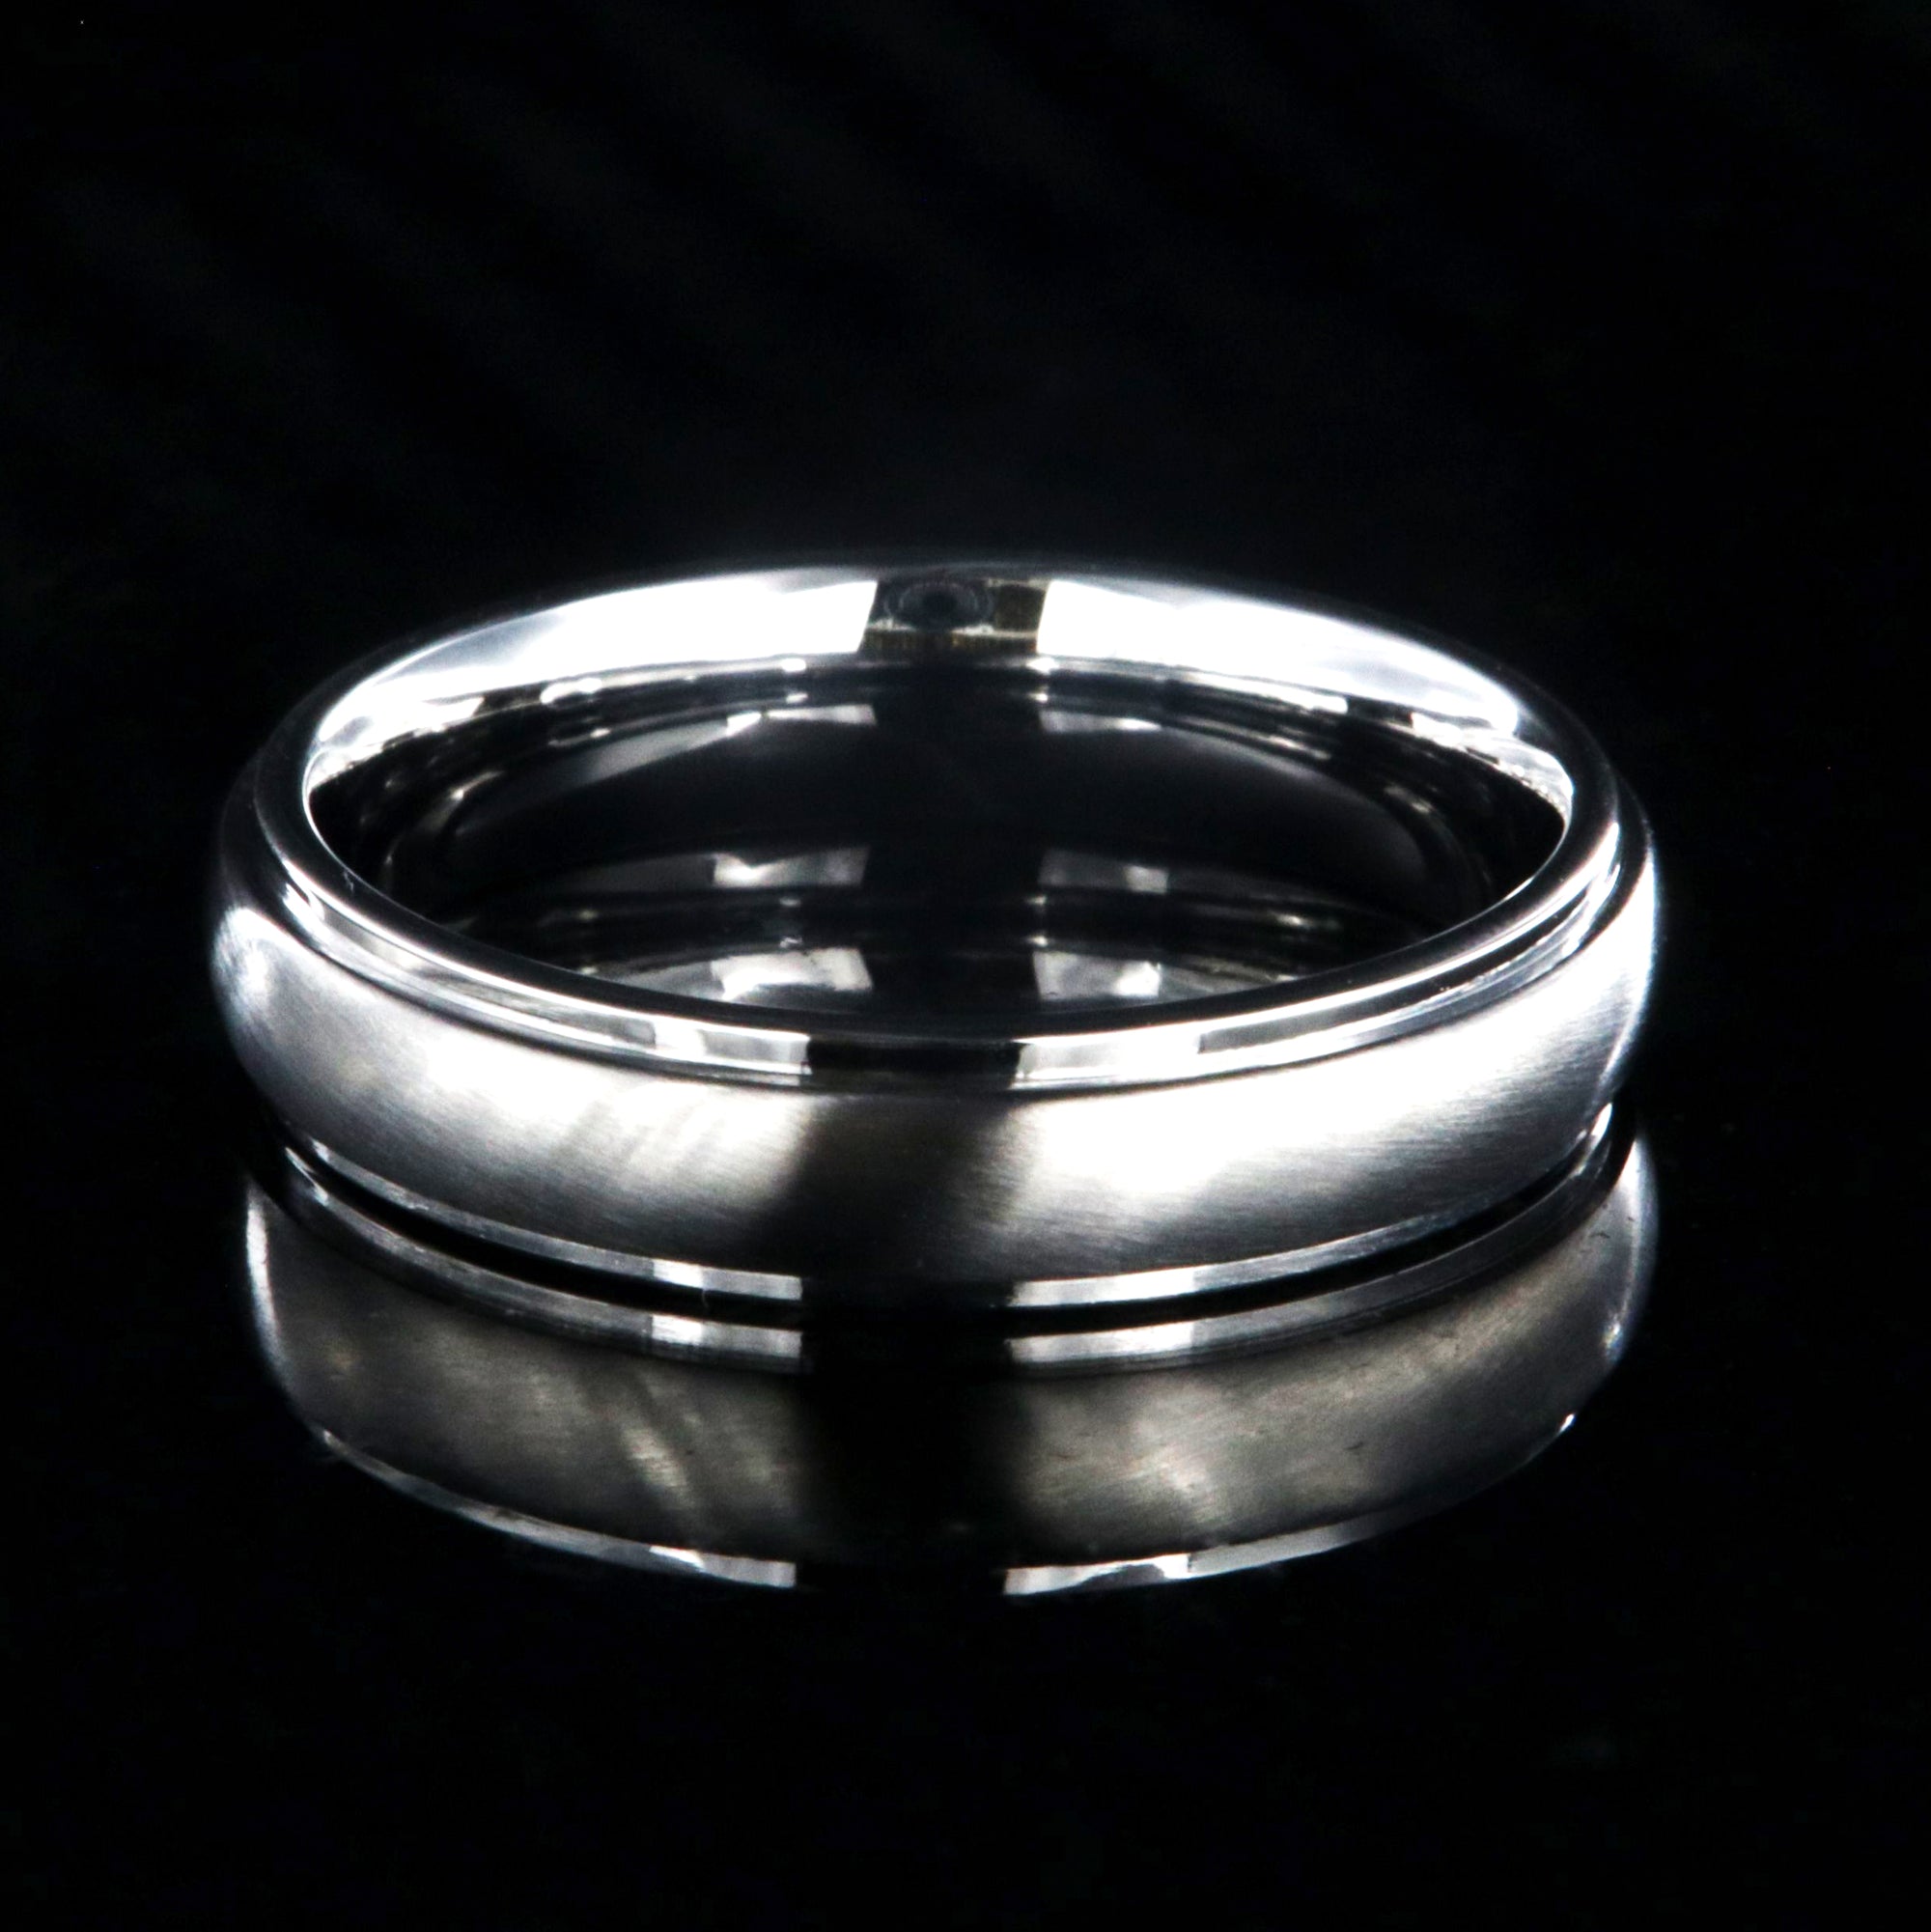 5mm wide cobalt ring with a raised center, stepped edges, and a rounded profile